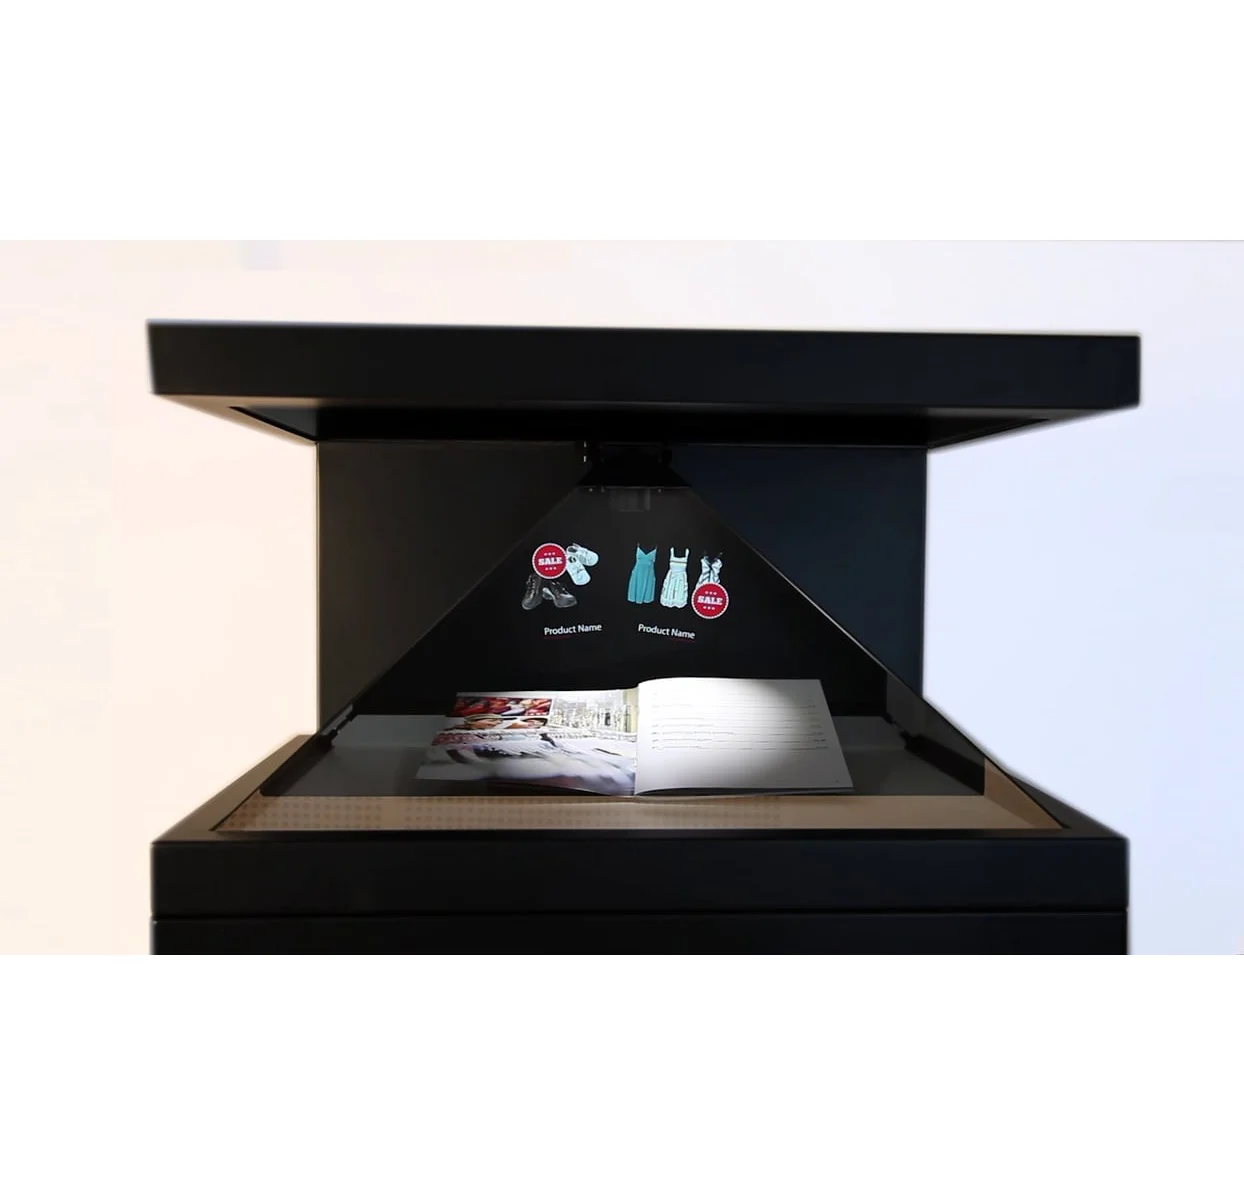 

New Products Holographic 3D Pyramid Hologram Display,holo pod/holo presence display, Black/white